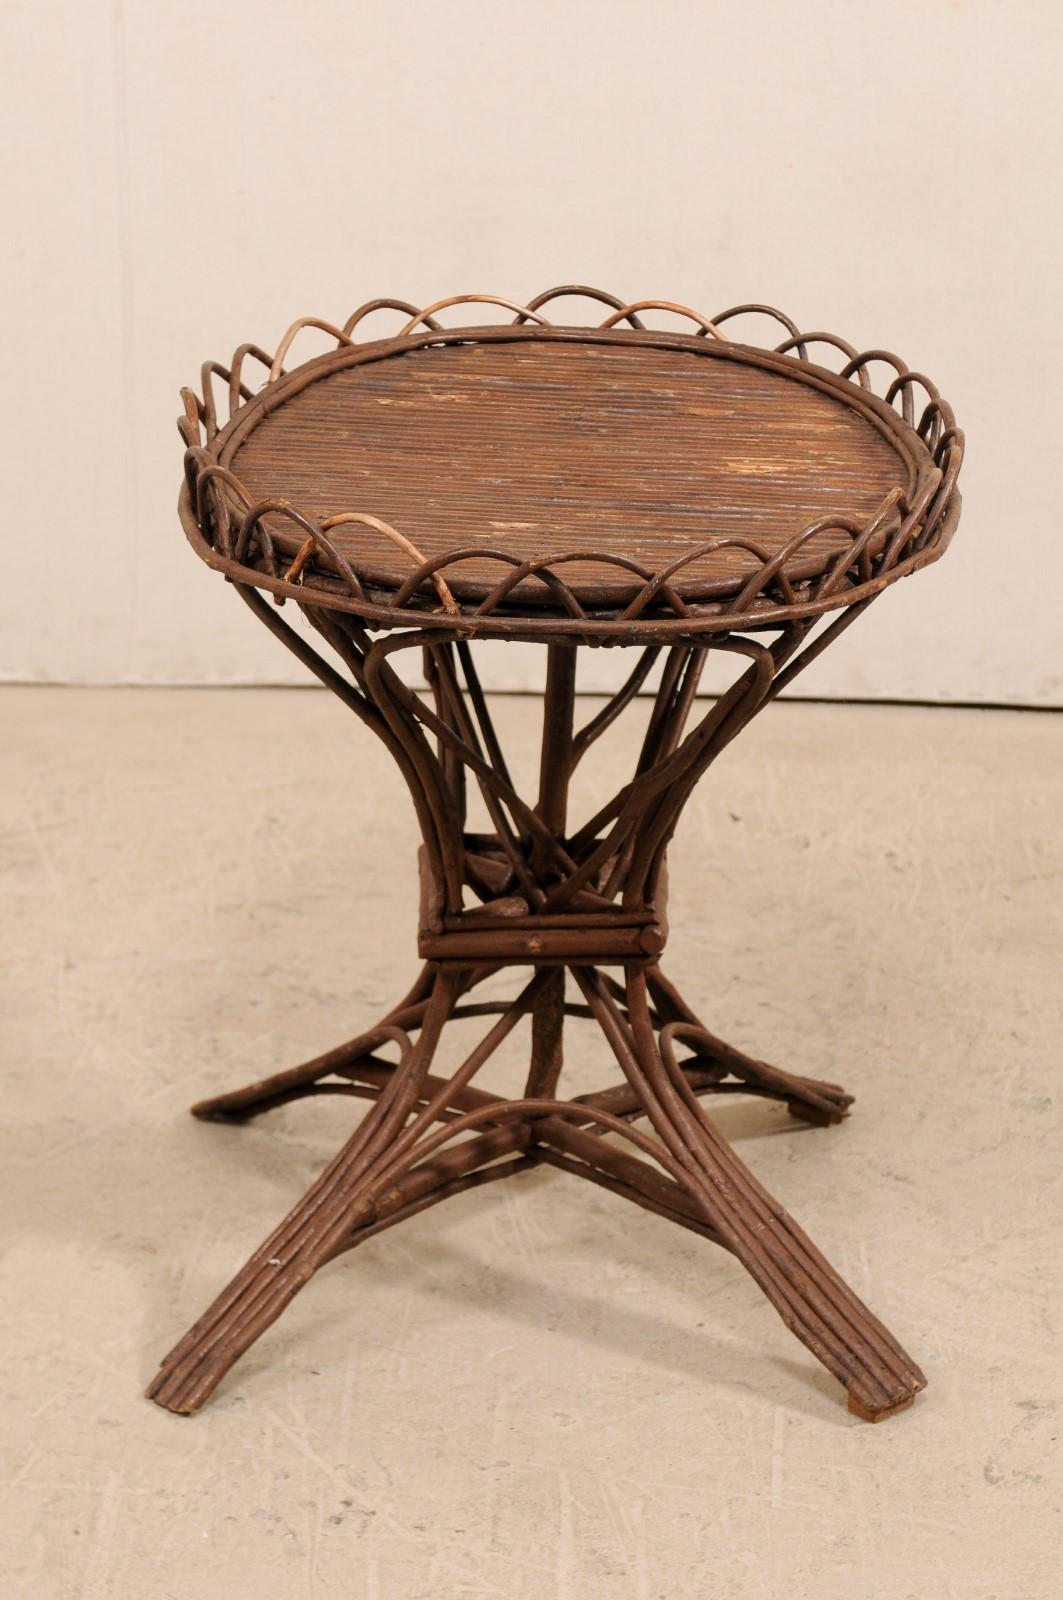 A Swedish early 20th century twig and reed table. This antique table from Sweden features a reeded oval top, with scalloped twig design framing the edges. The top is supported with a base with consists of groupings of various reeds and twigs, which